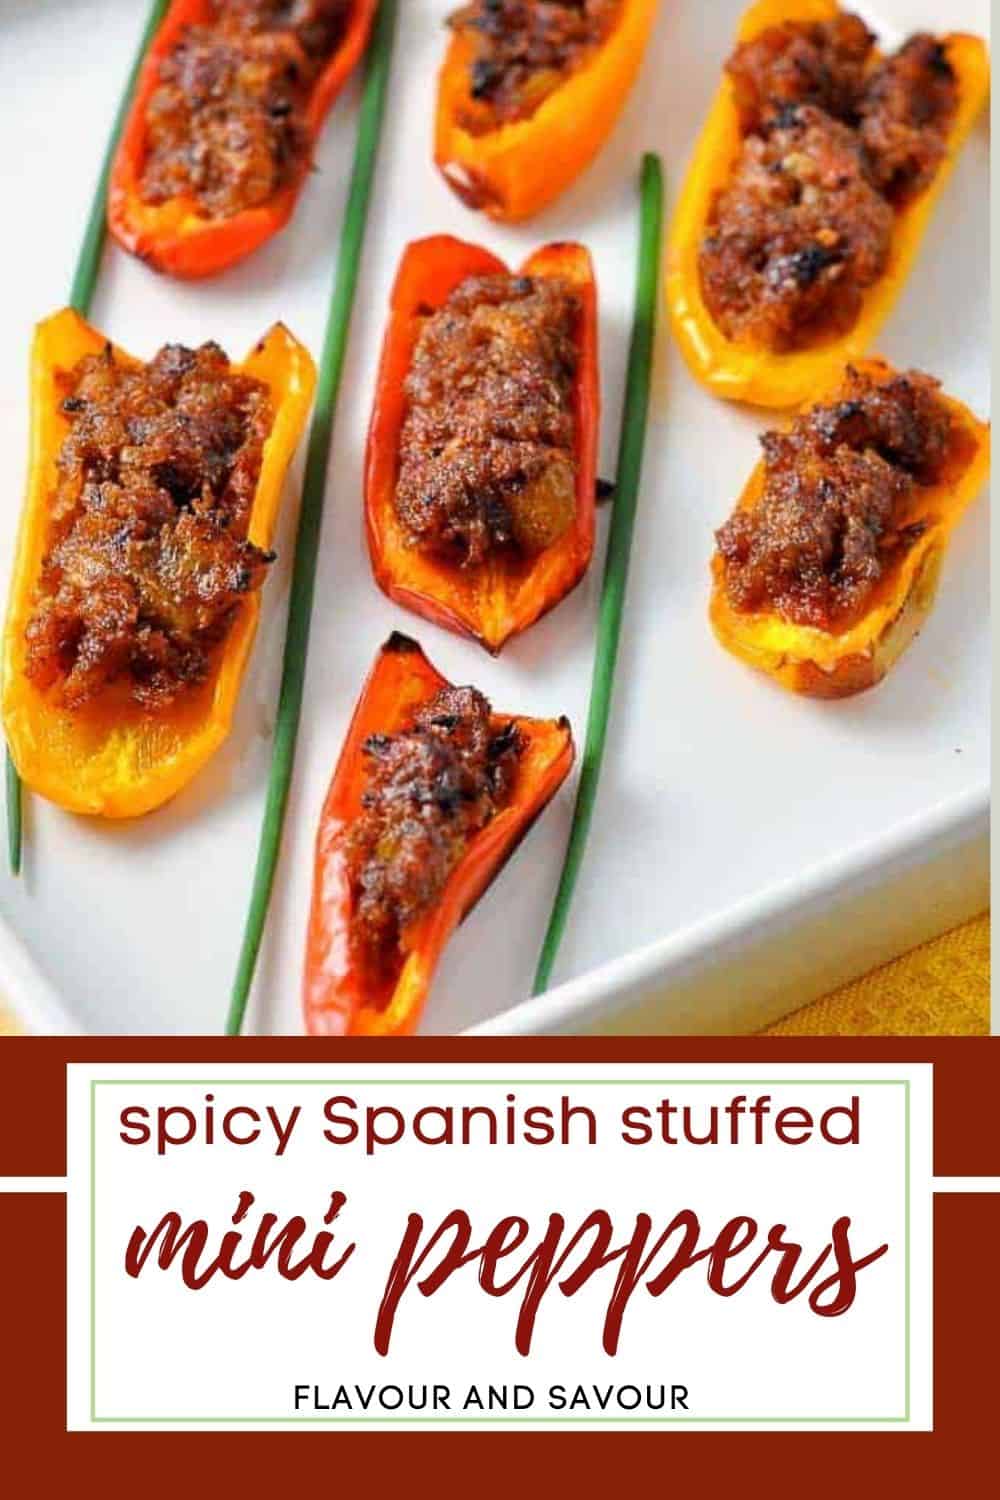 image with text for spicy stuffed mini peppers
